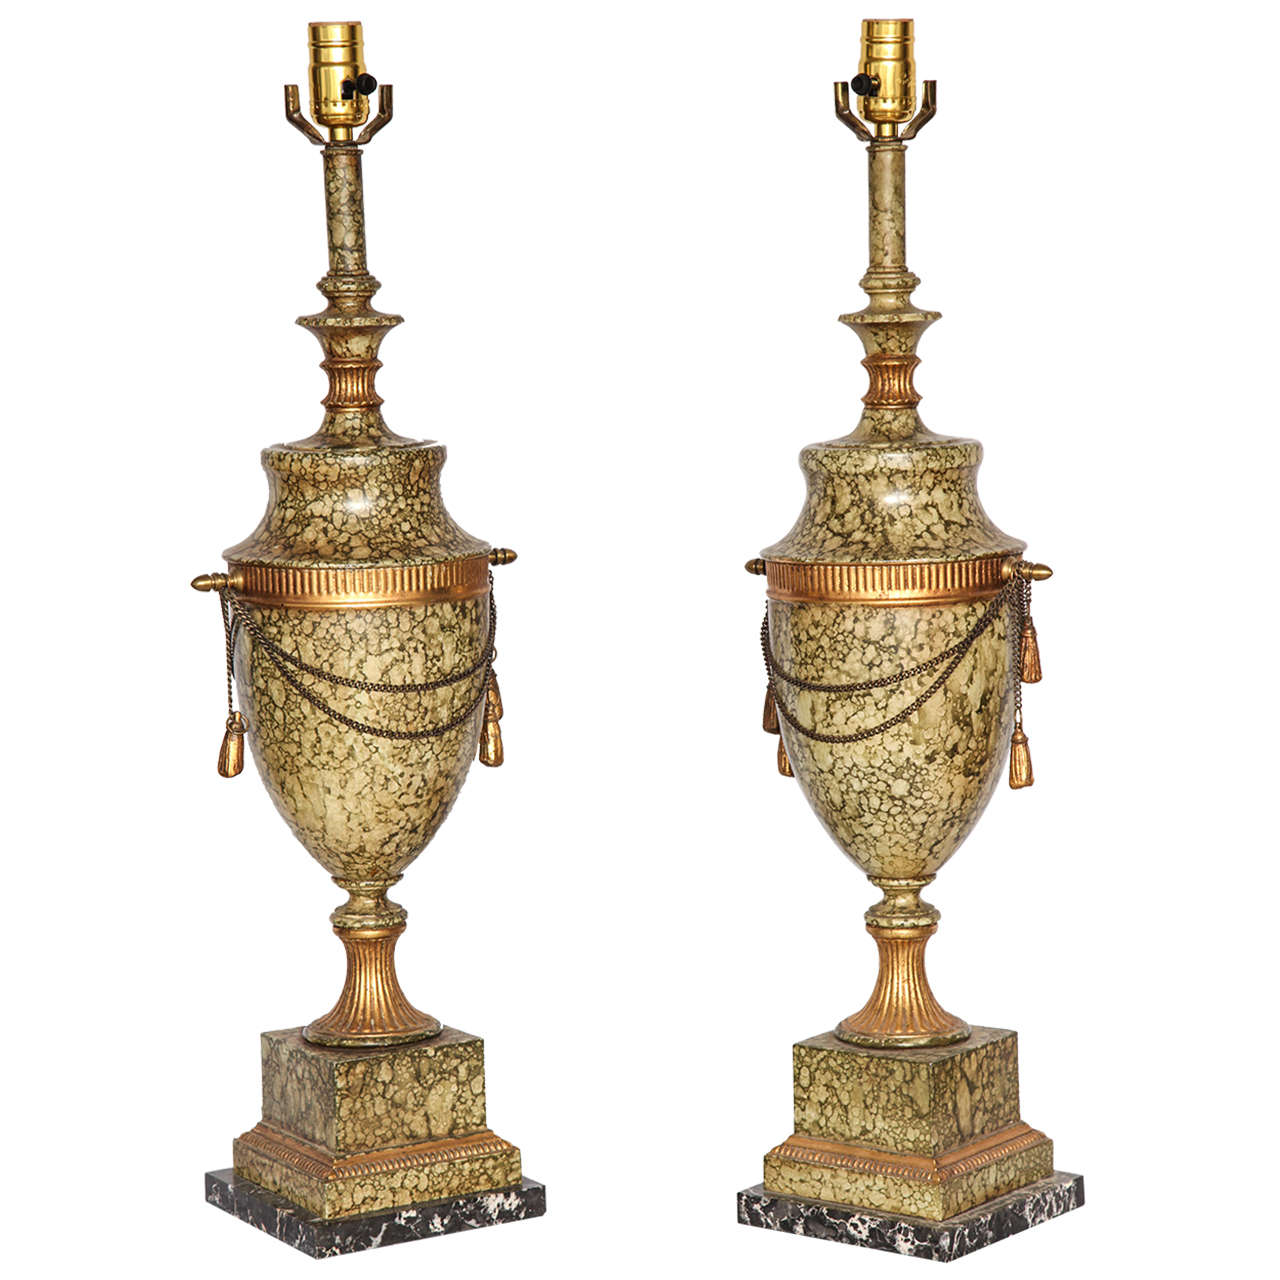 20th Century Pair of Tole Urn-Form Lamps